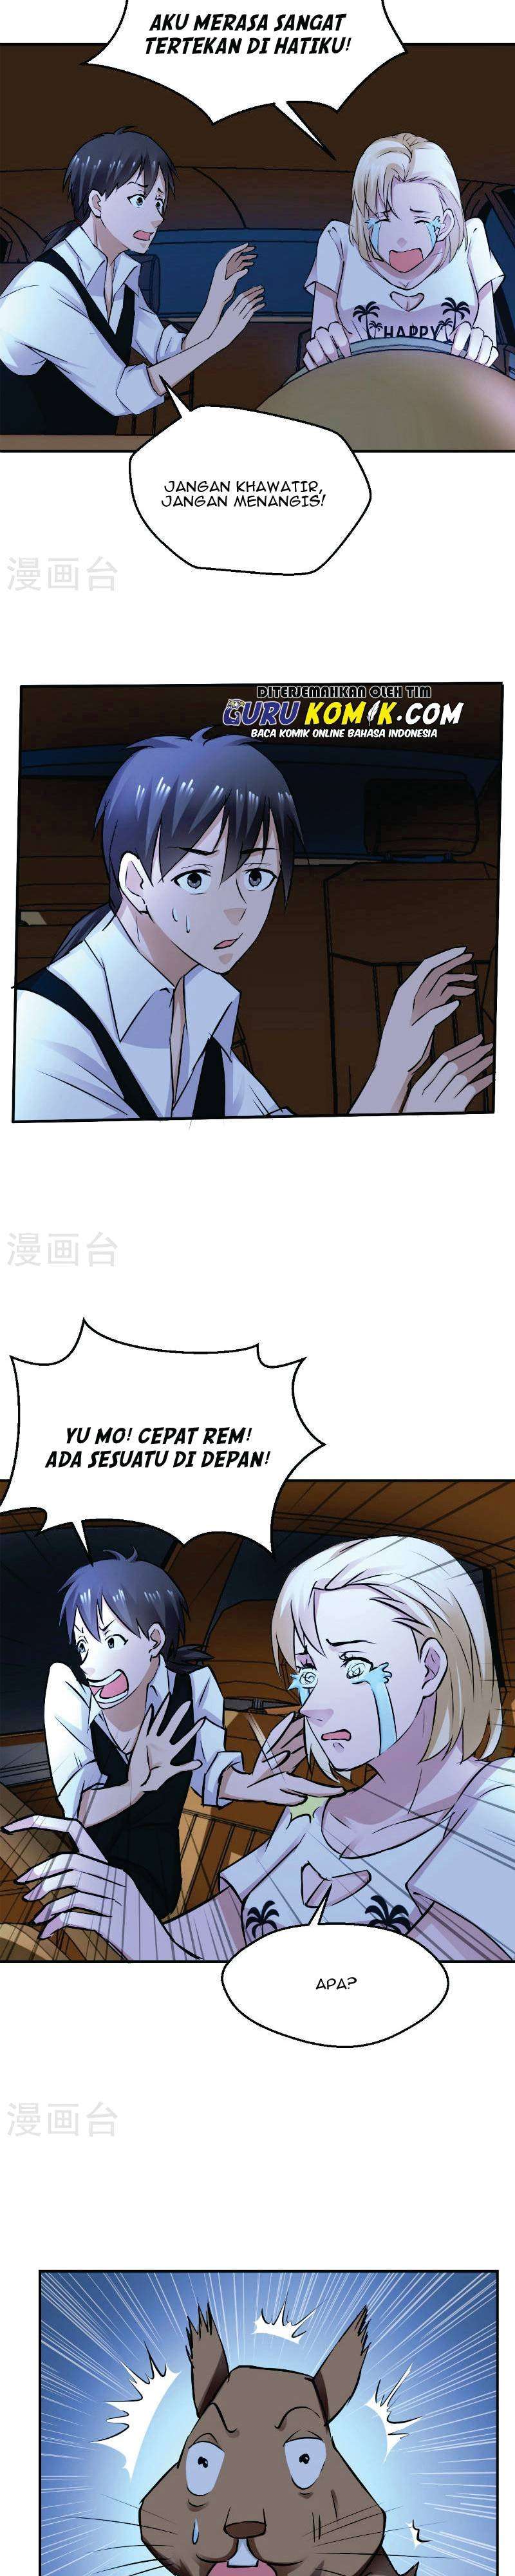 Close Mad Doctor Chapter 48-52